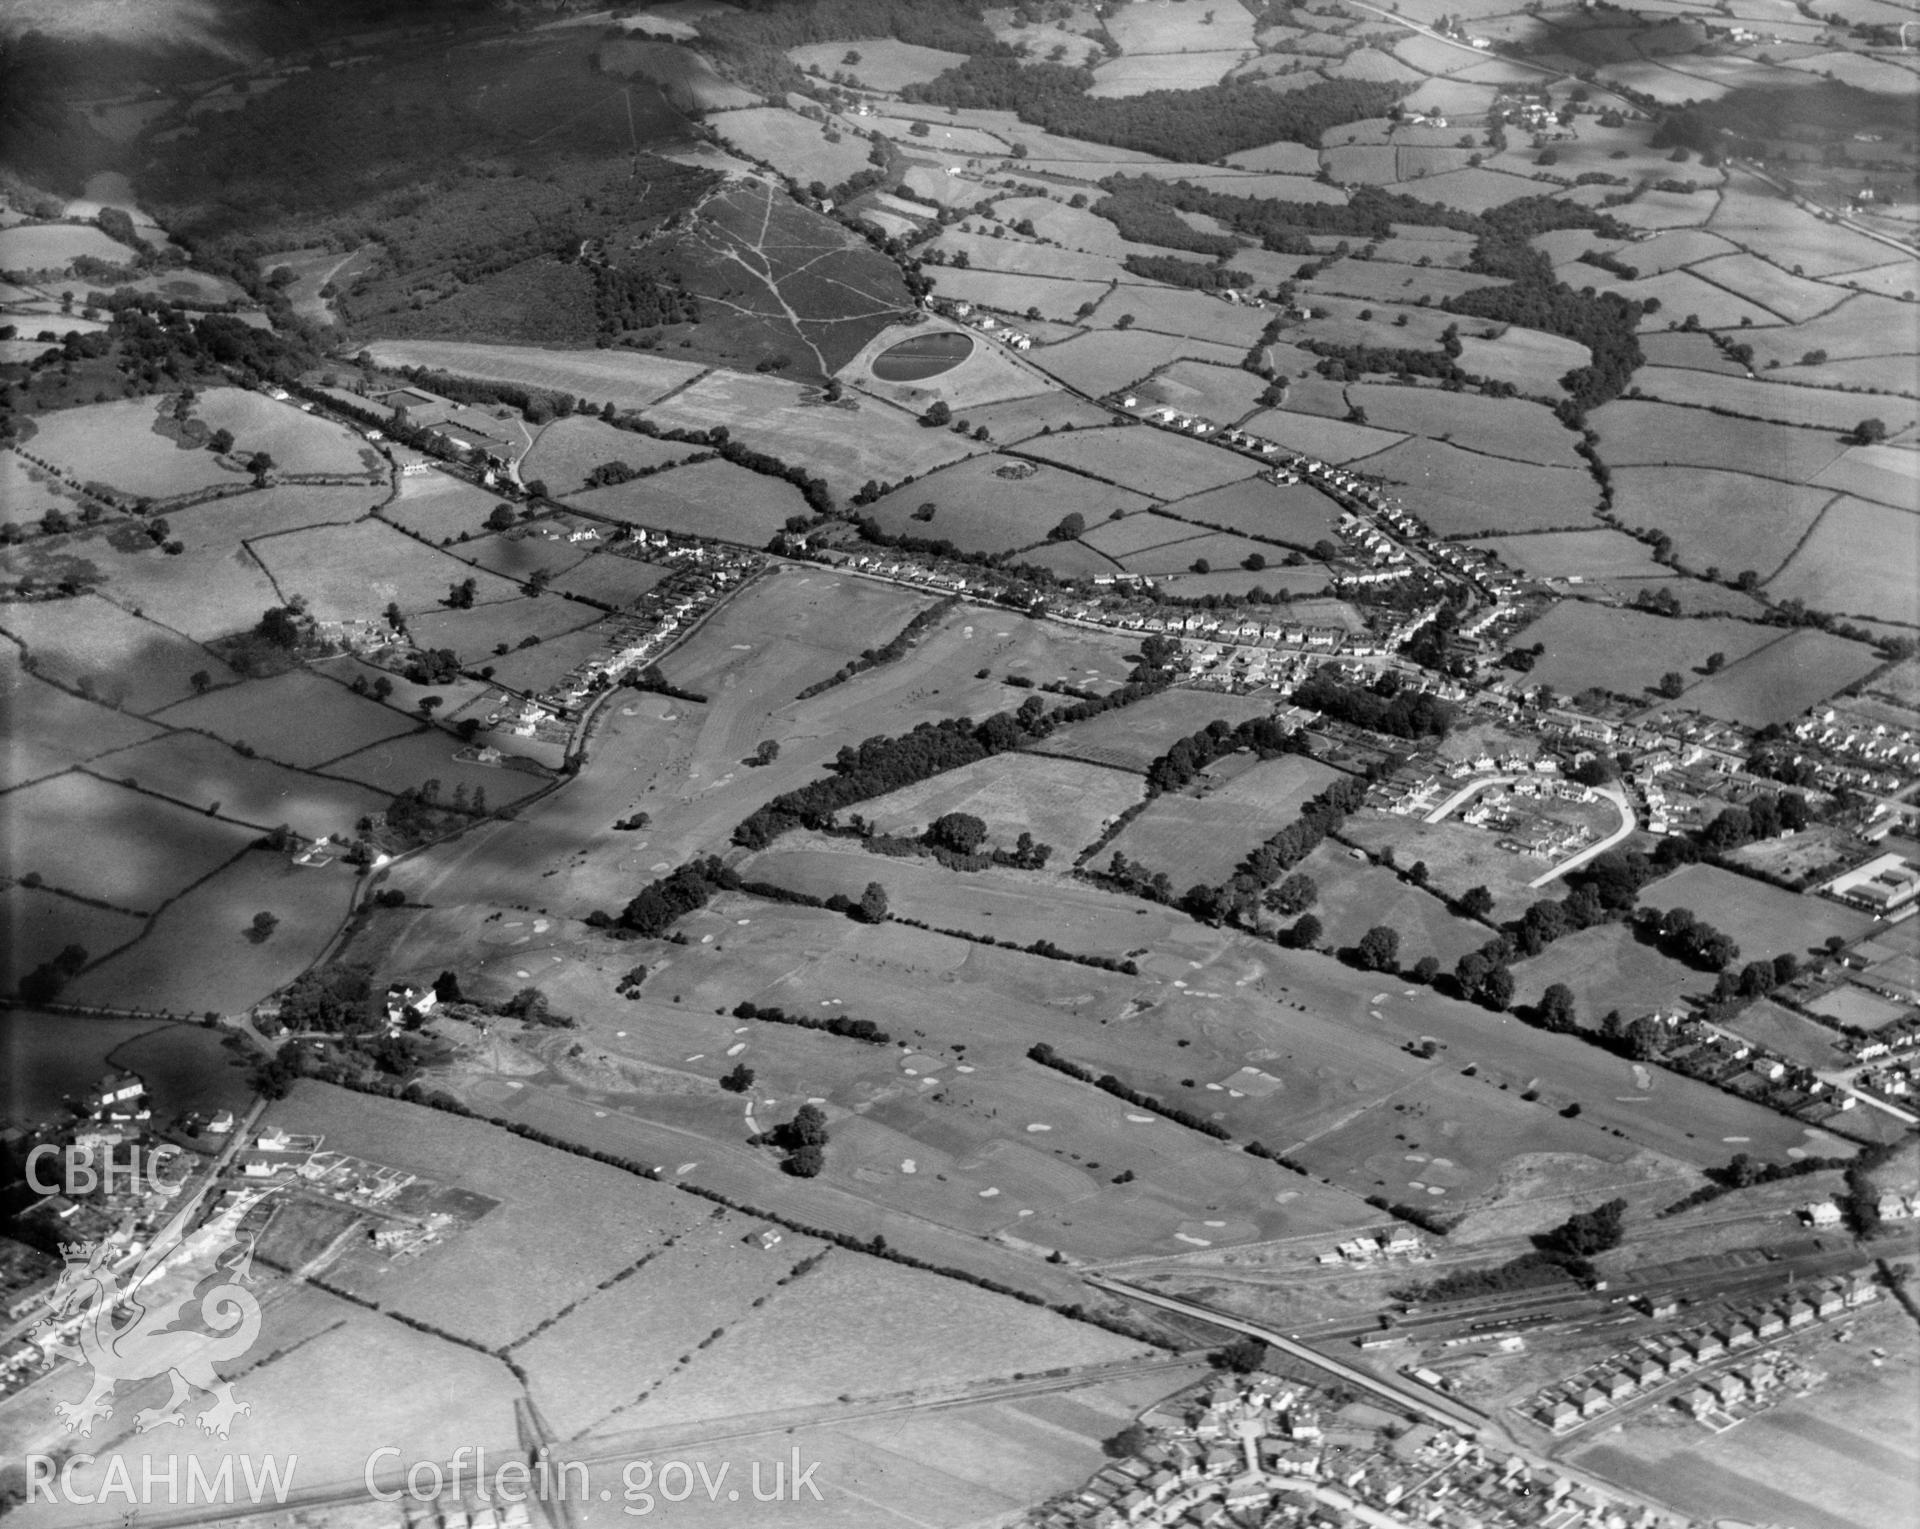 View of Whitchurch golf club, oblique aerial view. 5?x4? black and white glass plate negative.